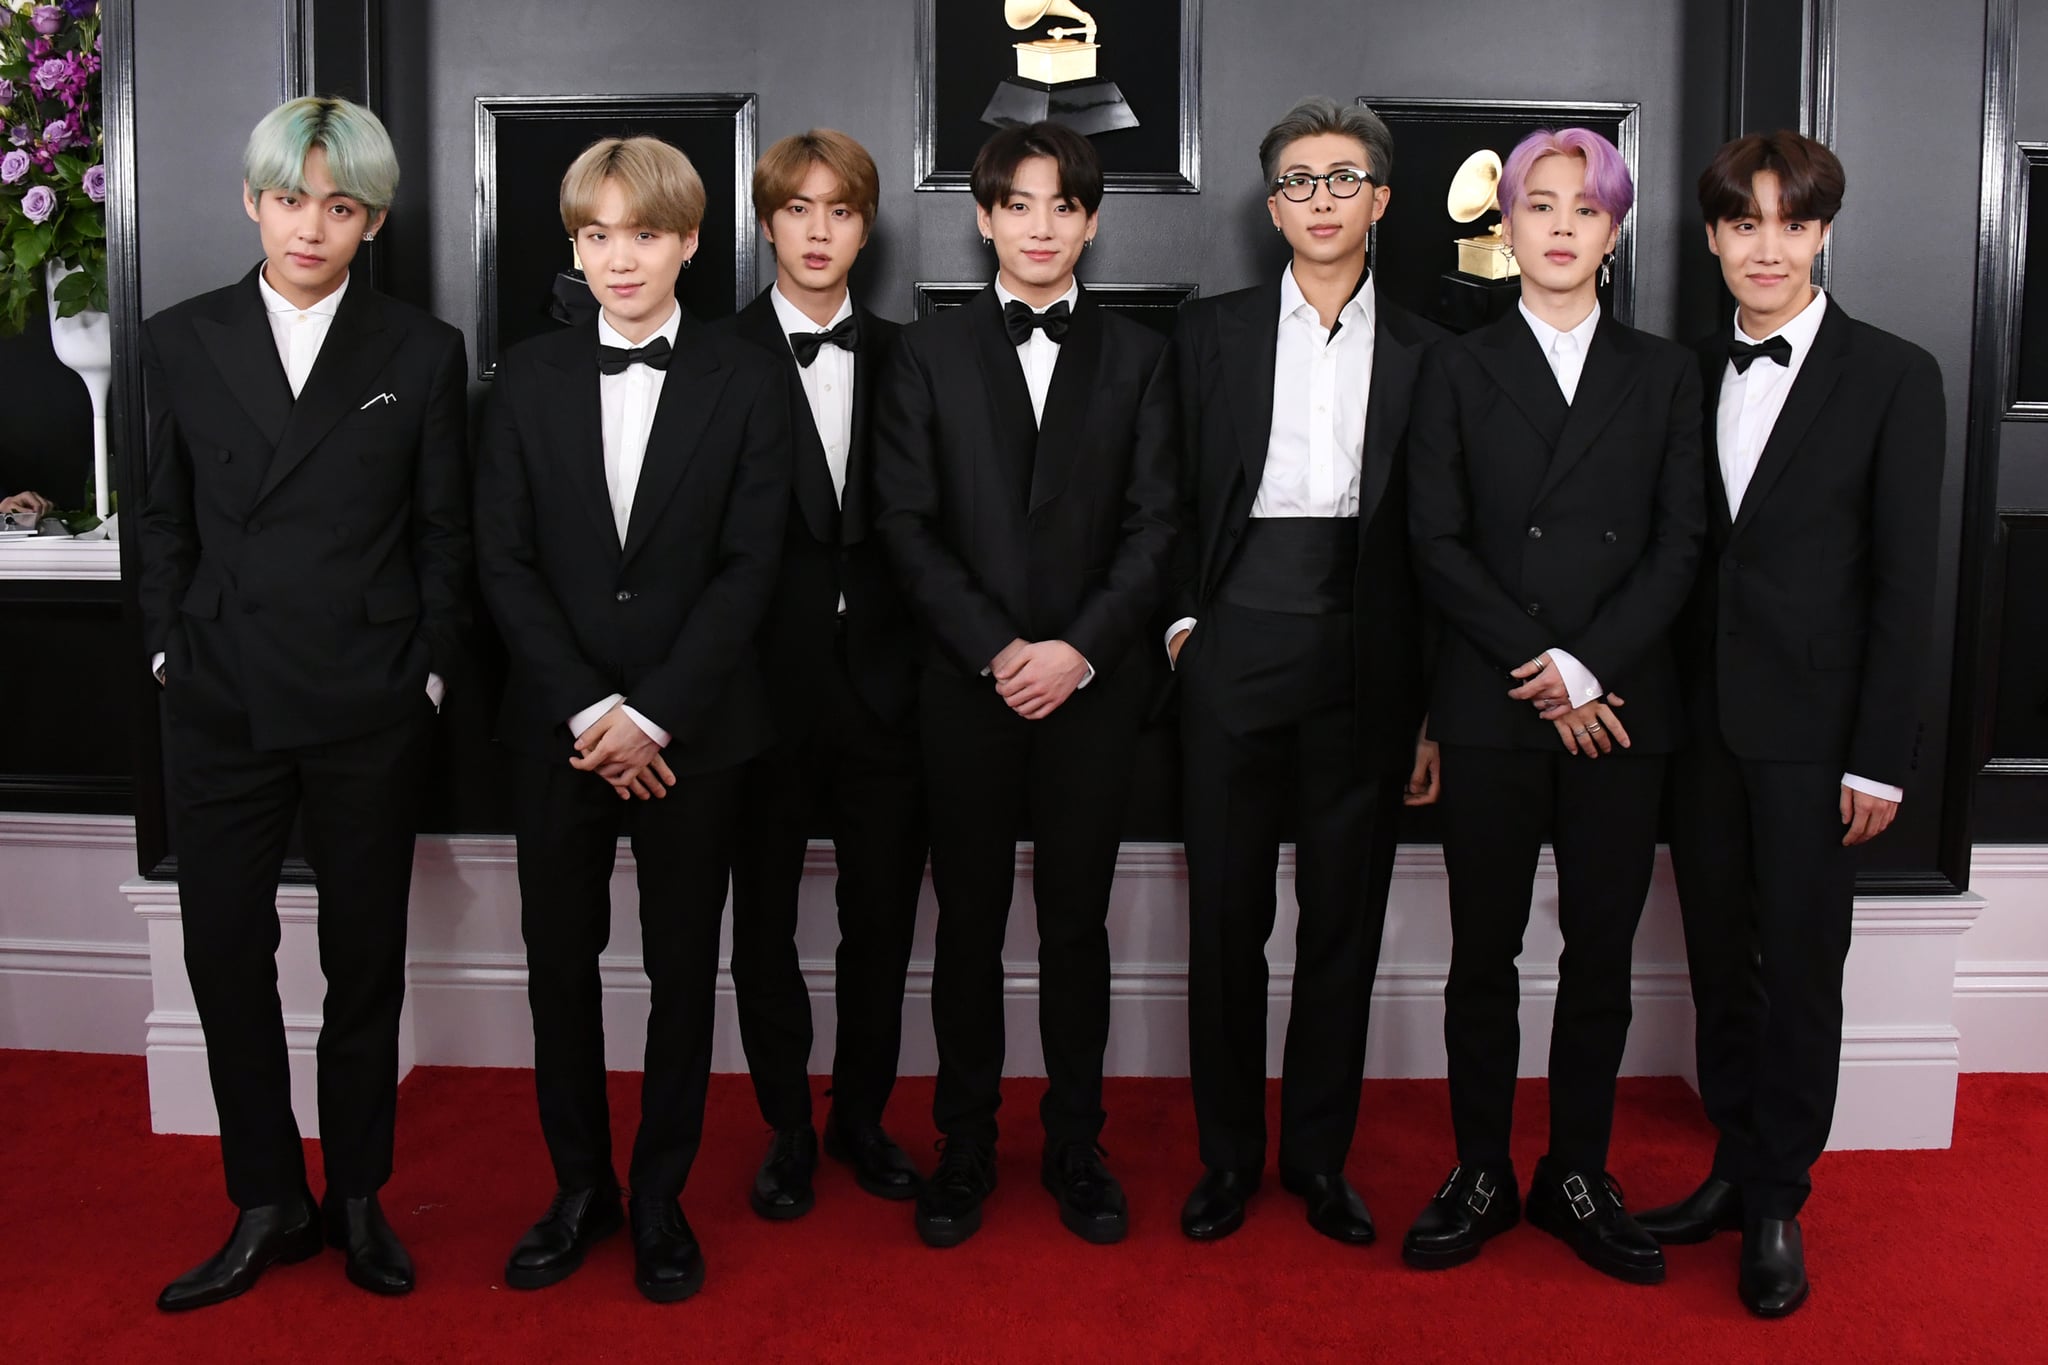 LOS ANGELES, CALIFORNIA - FEBRUARY 10: BTS attends the 61st Annual GRAMMY Awards at Staples Center on February 10, 2019 in Los Angeles, California. (Photo by Jon Kopaloff/Getty Images)